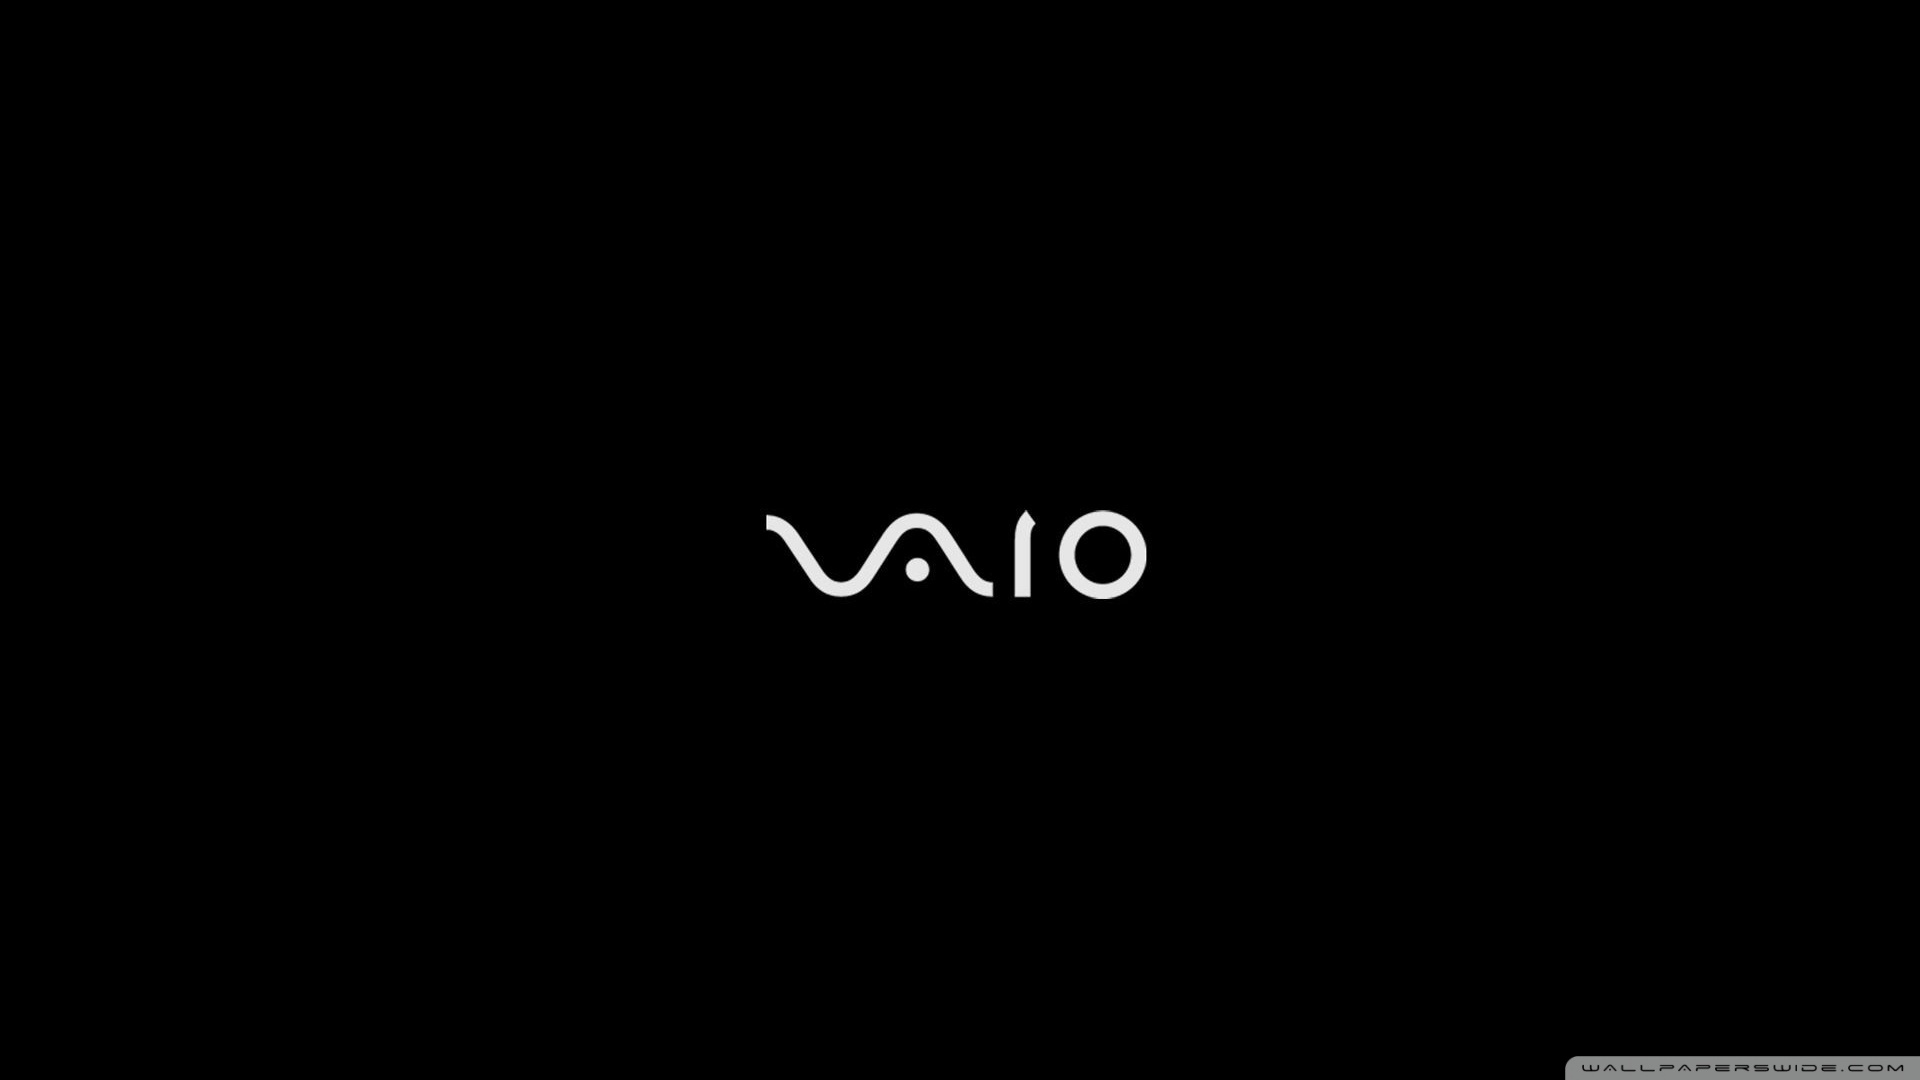 Free Download Sony Vaio Wallpaper 19x1080 Sony Vaio 19x1080 For Your Desktop Mobile Tablet Explore 46 Vaio Wallpapers 1366x768 Hd Wallpaper 1366x768 Free 1366x768 Hd Wallpapers Wallpaper For Laptops Free